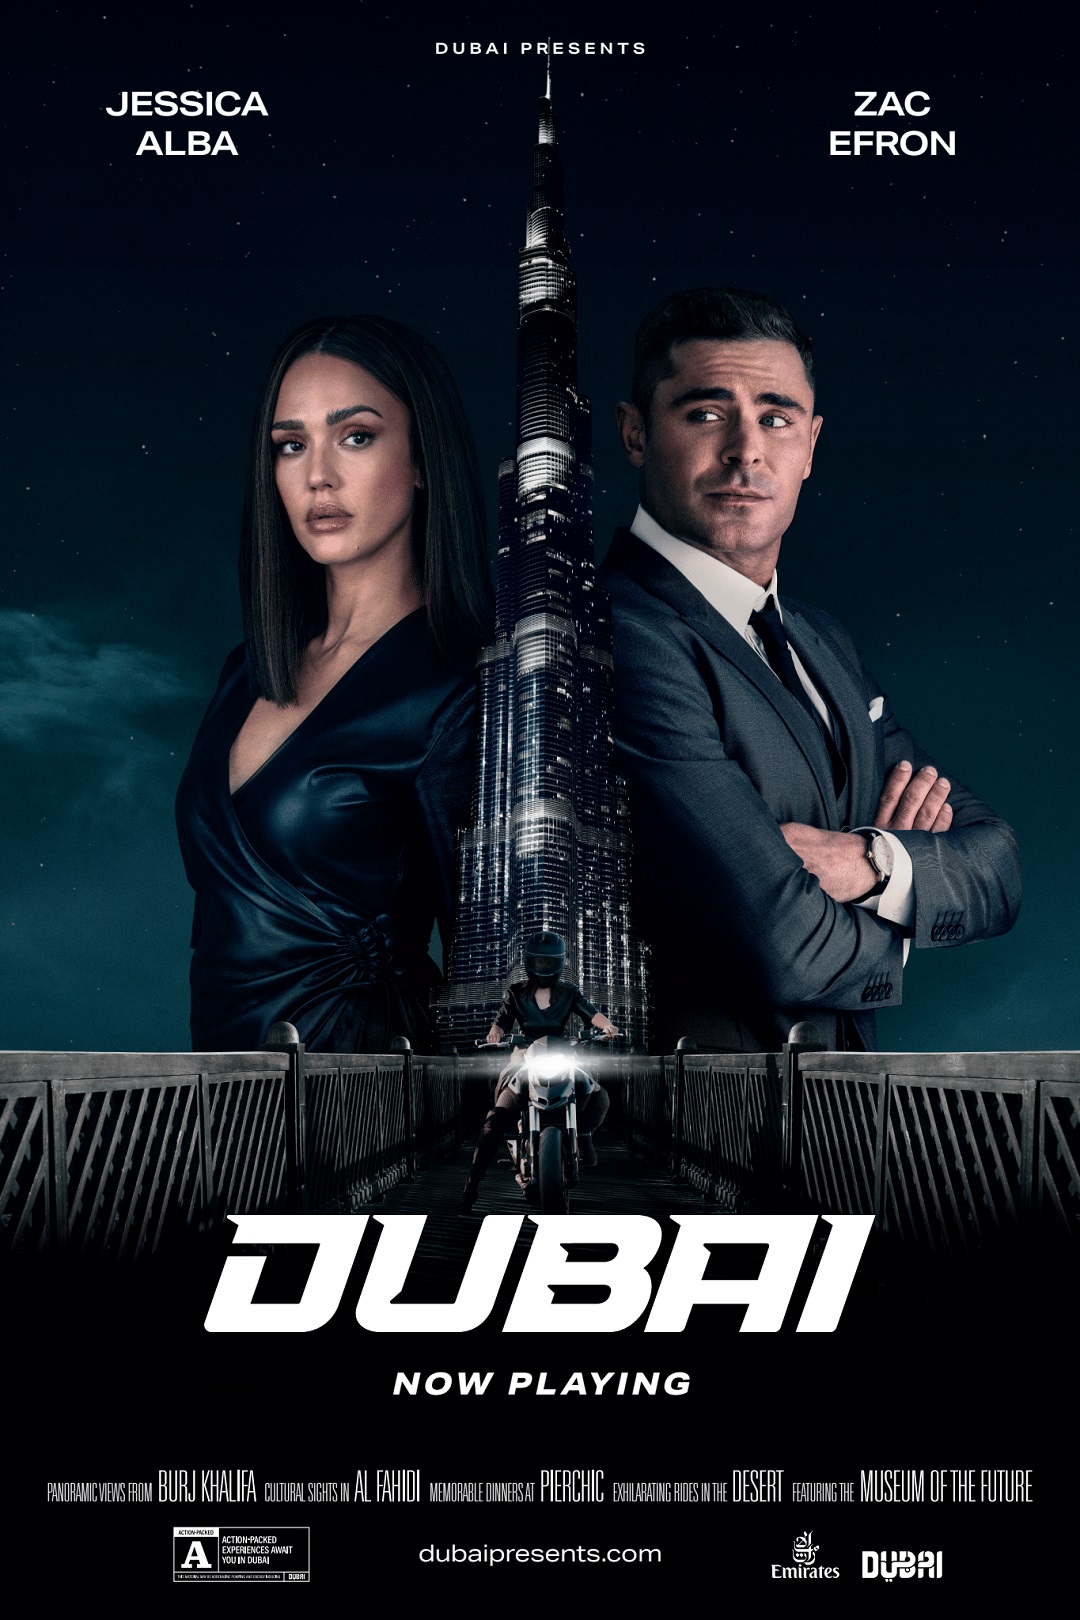 Image for Dubai launches new global marketing campaign starring Jessica Alba and Zac Efron